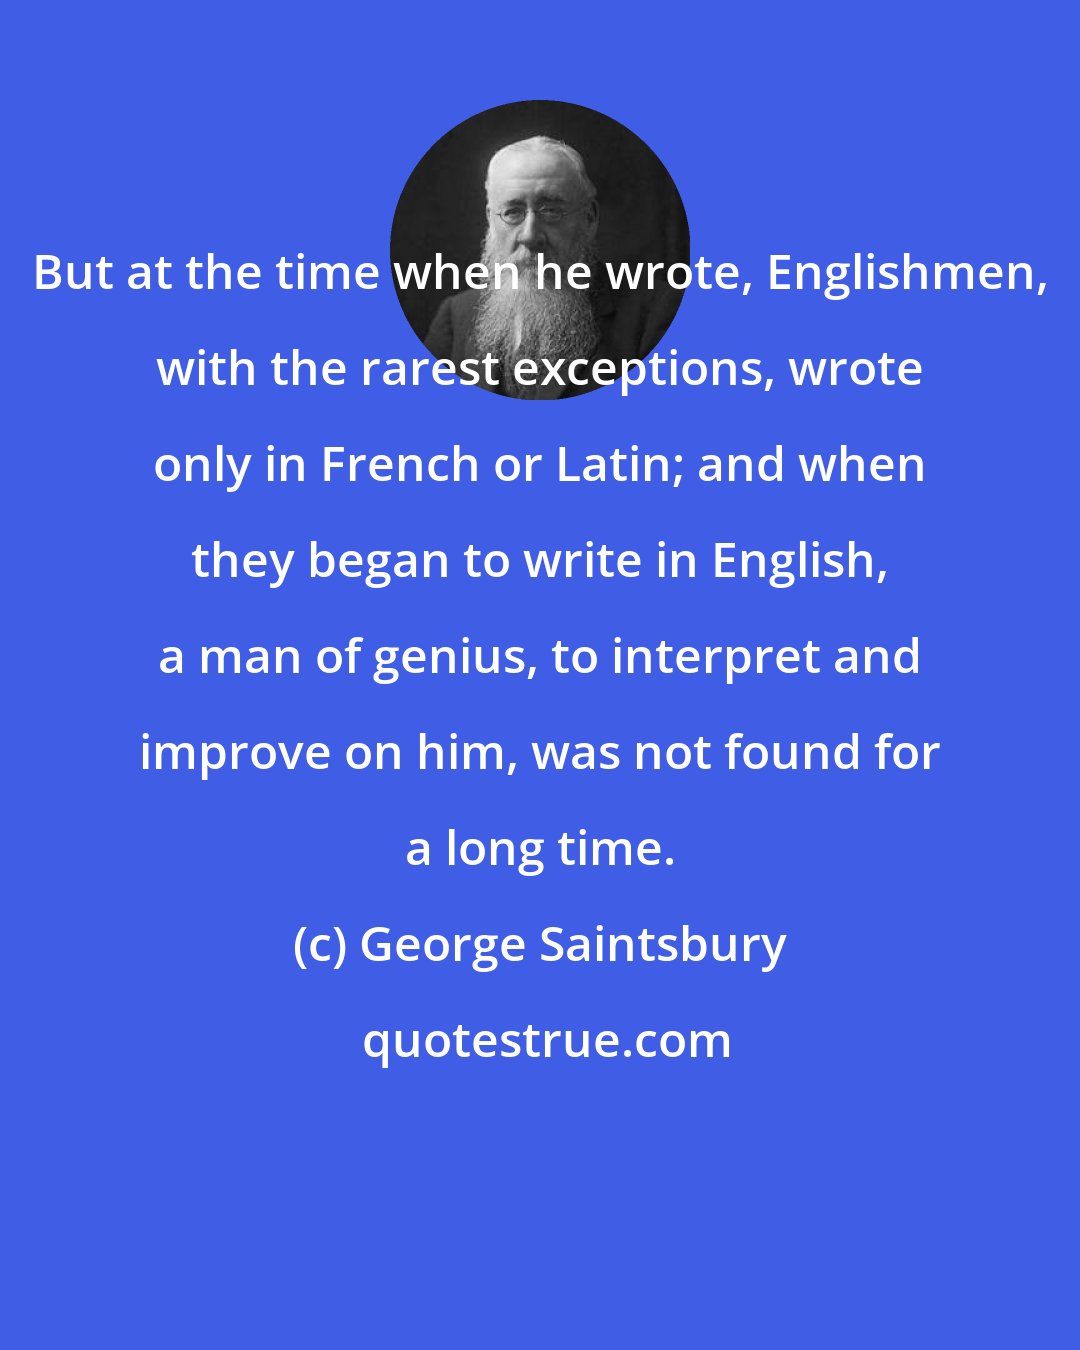 George Saintsbury: But at the time when he wrote, Englishmen, with the rarest exceptions, wrote only in French or Latin; and when they began to write in English, a man of genius, to interpret and improve on him, was not found for a long time.